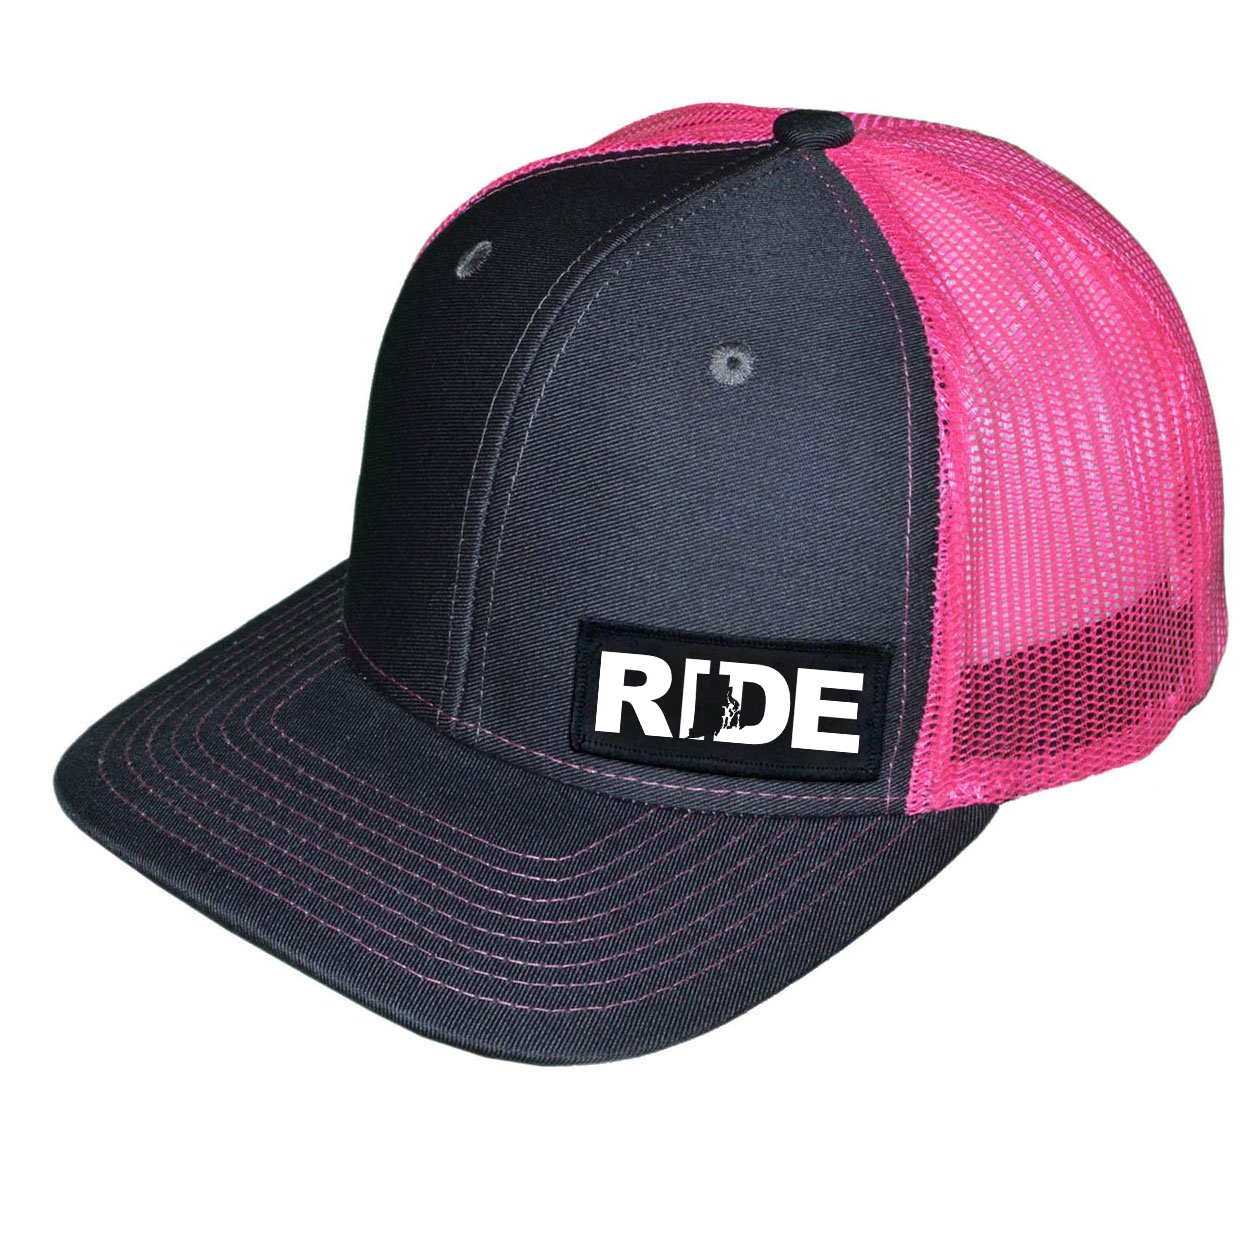 Ride Rhode Island Night Out Woven Patch Snapback Trucker Hat Charcoal/Neon Pink (White Logo)